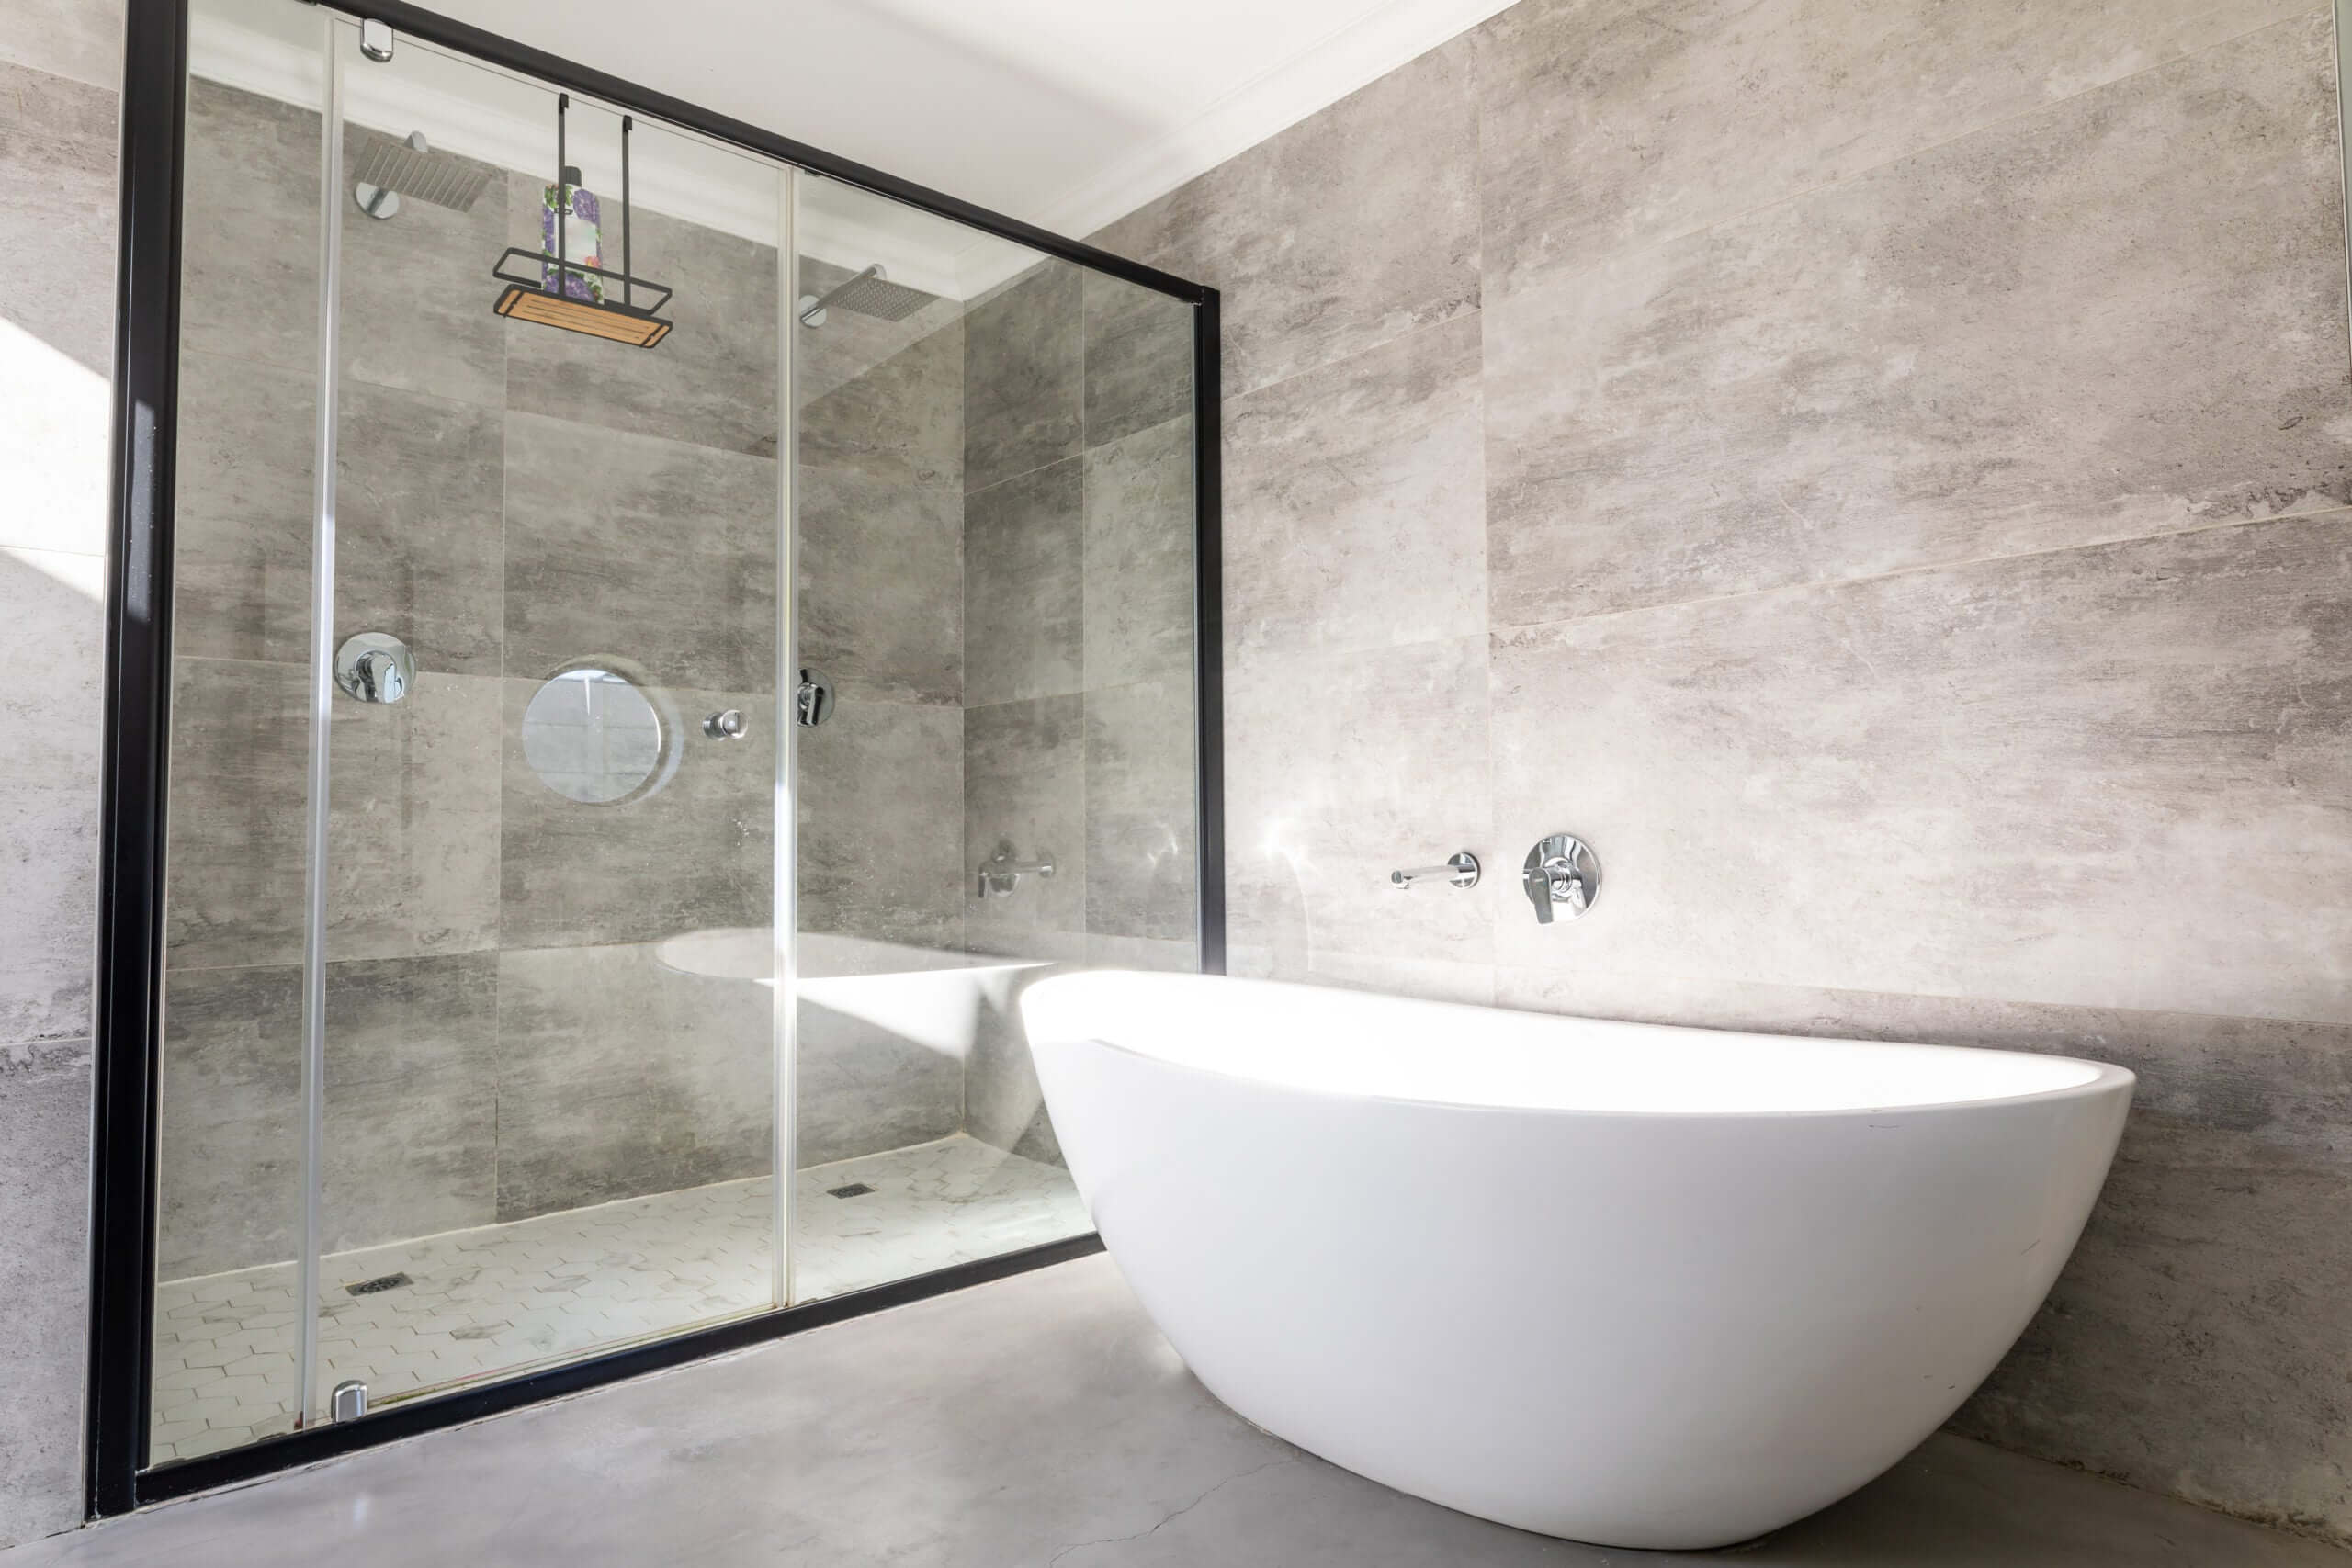 Using Bathroom Cladding Panels in Your Renovation Project